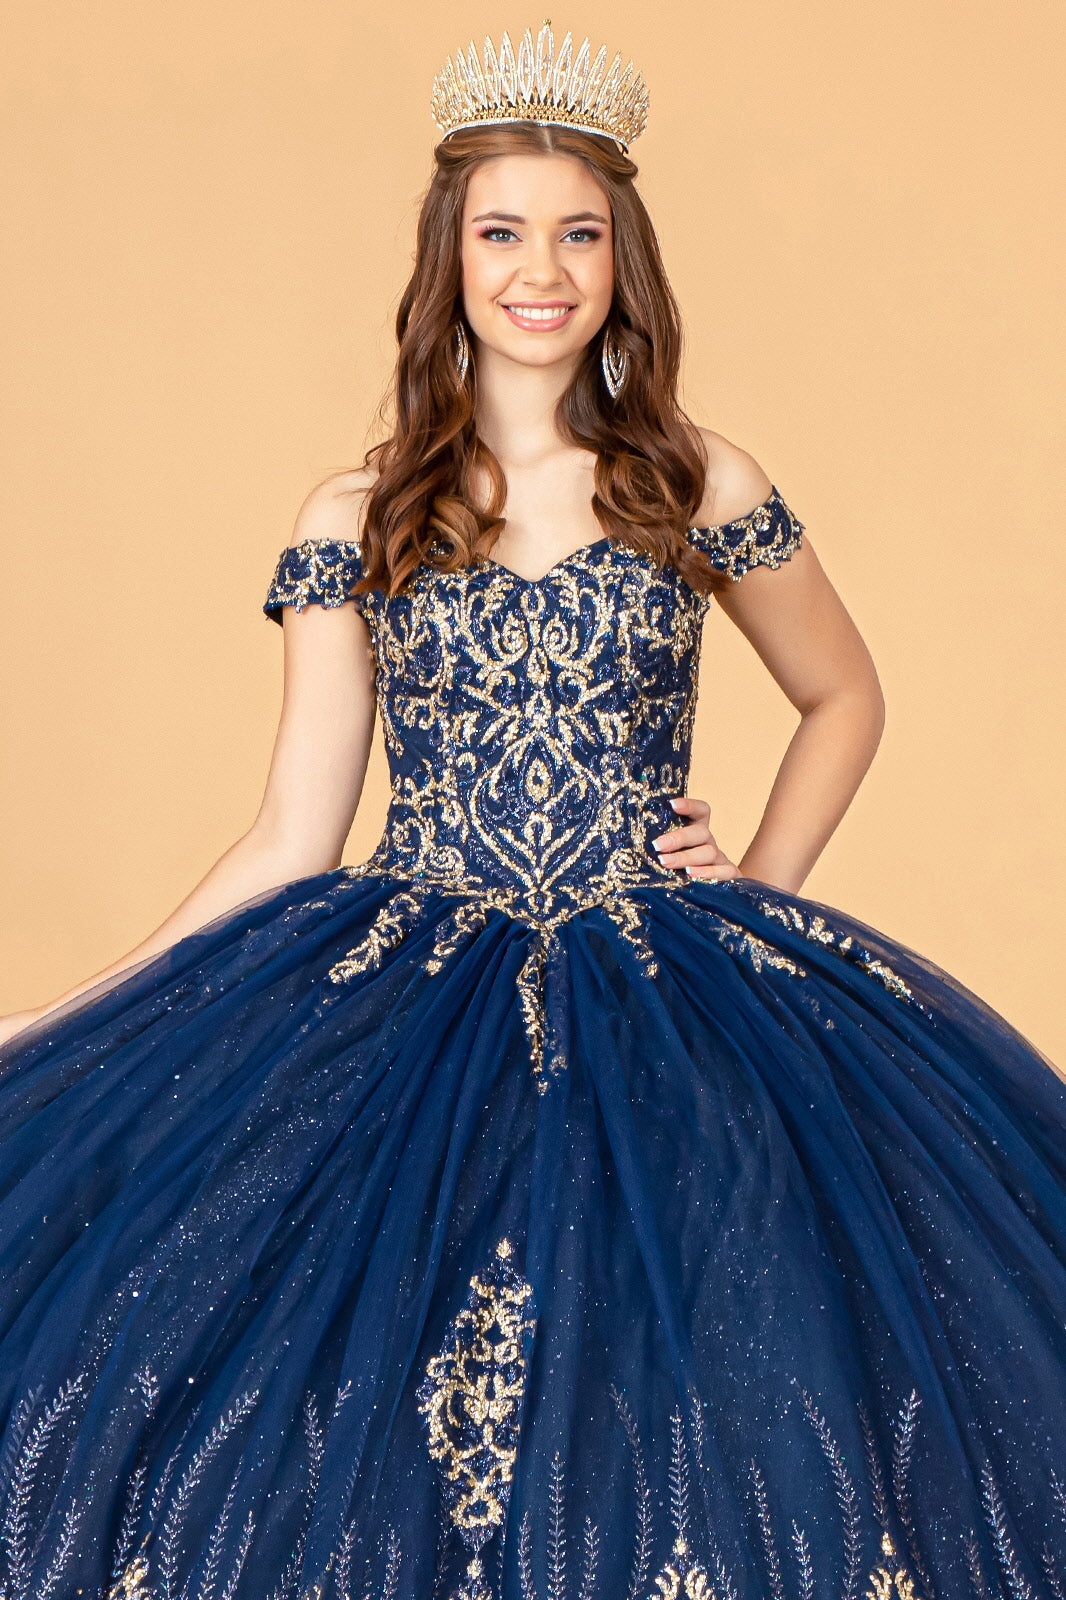 Glitter Mesh Quinceanera Dress Sequin and Beads GLGL3079-QUINCEANERA-smcfashion.com